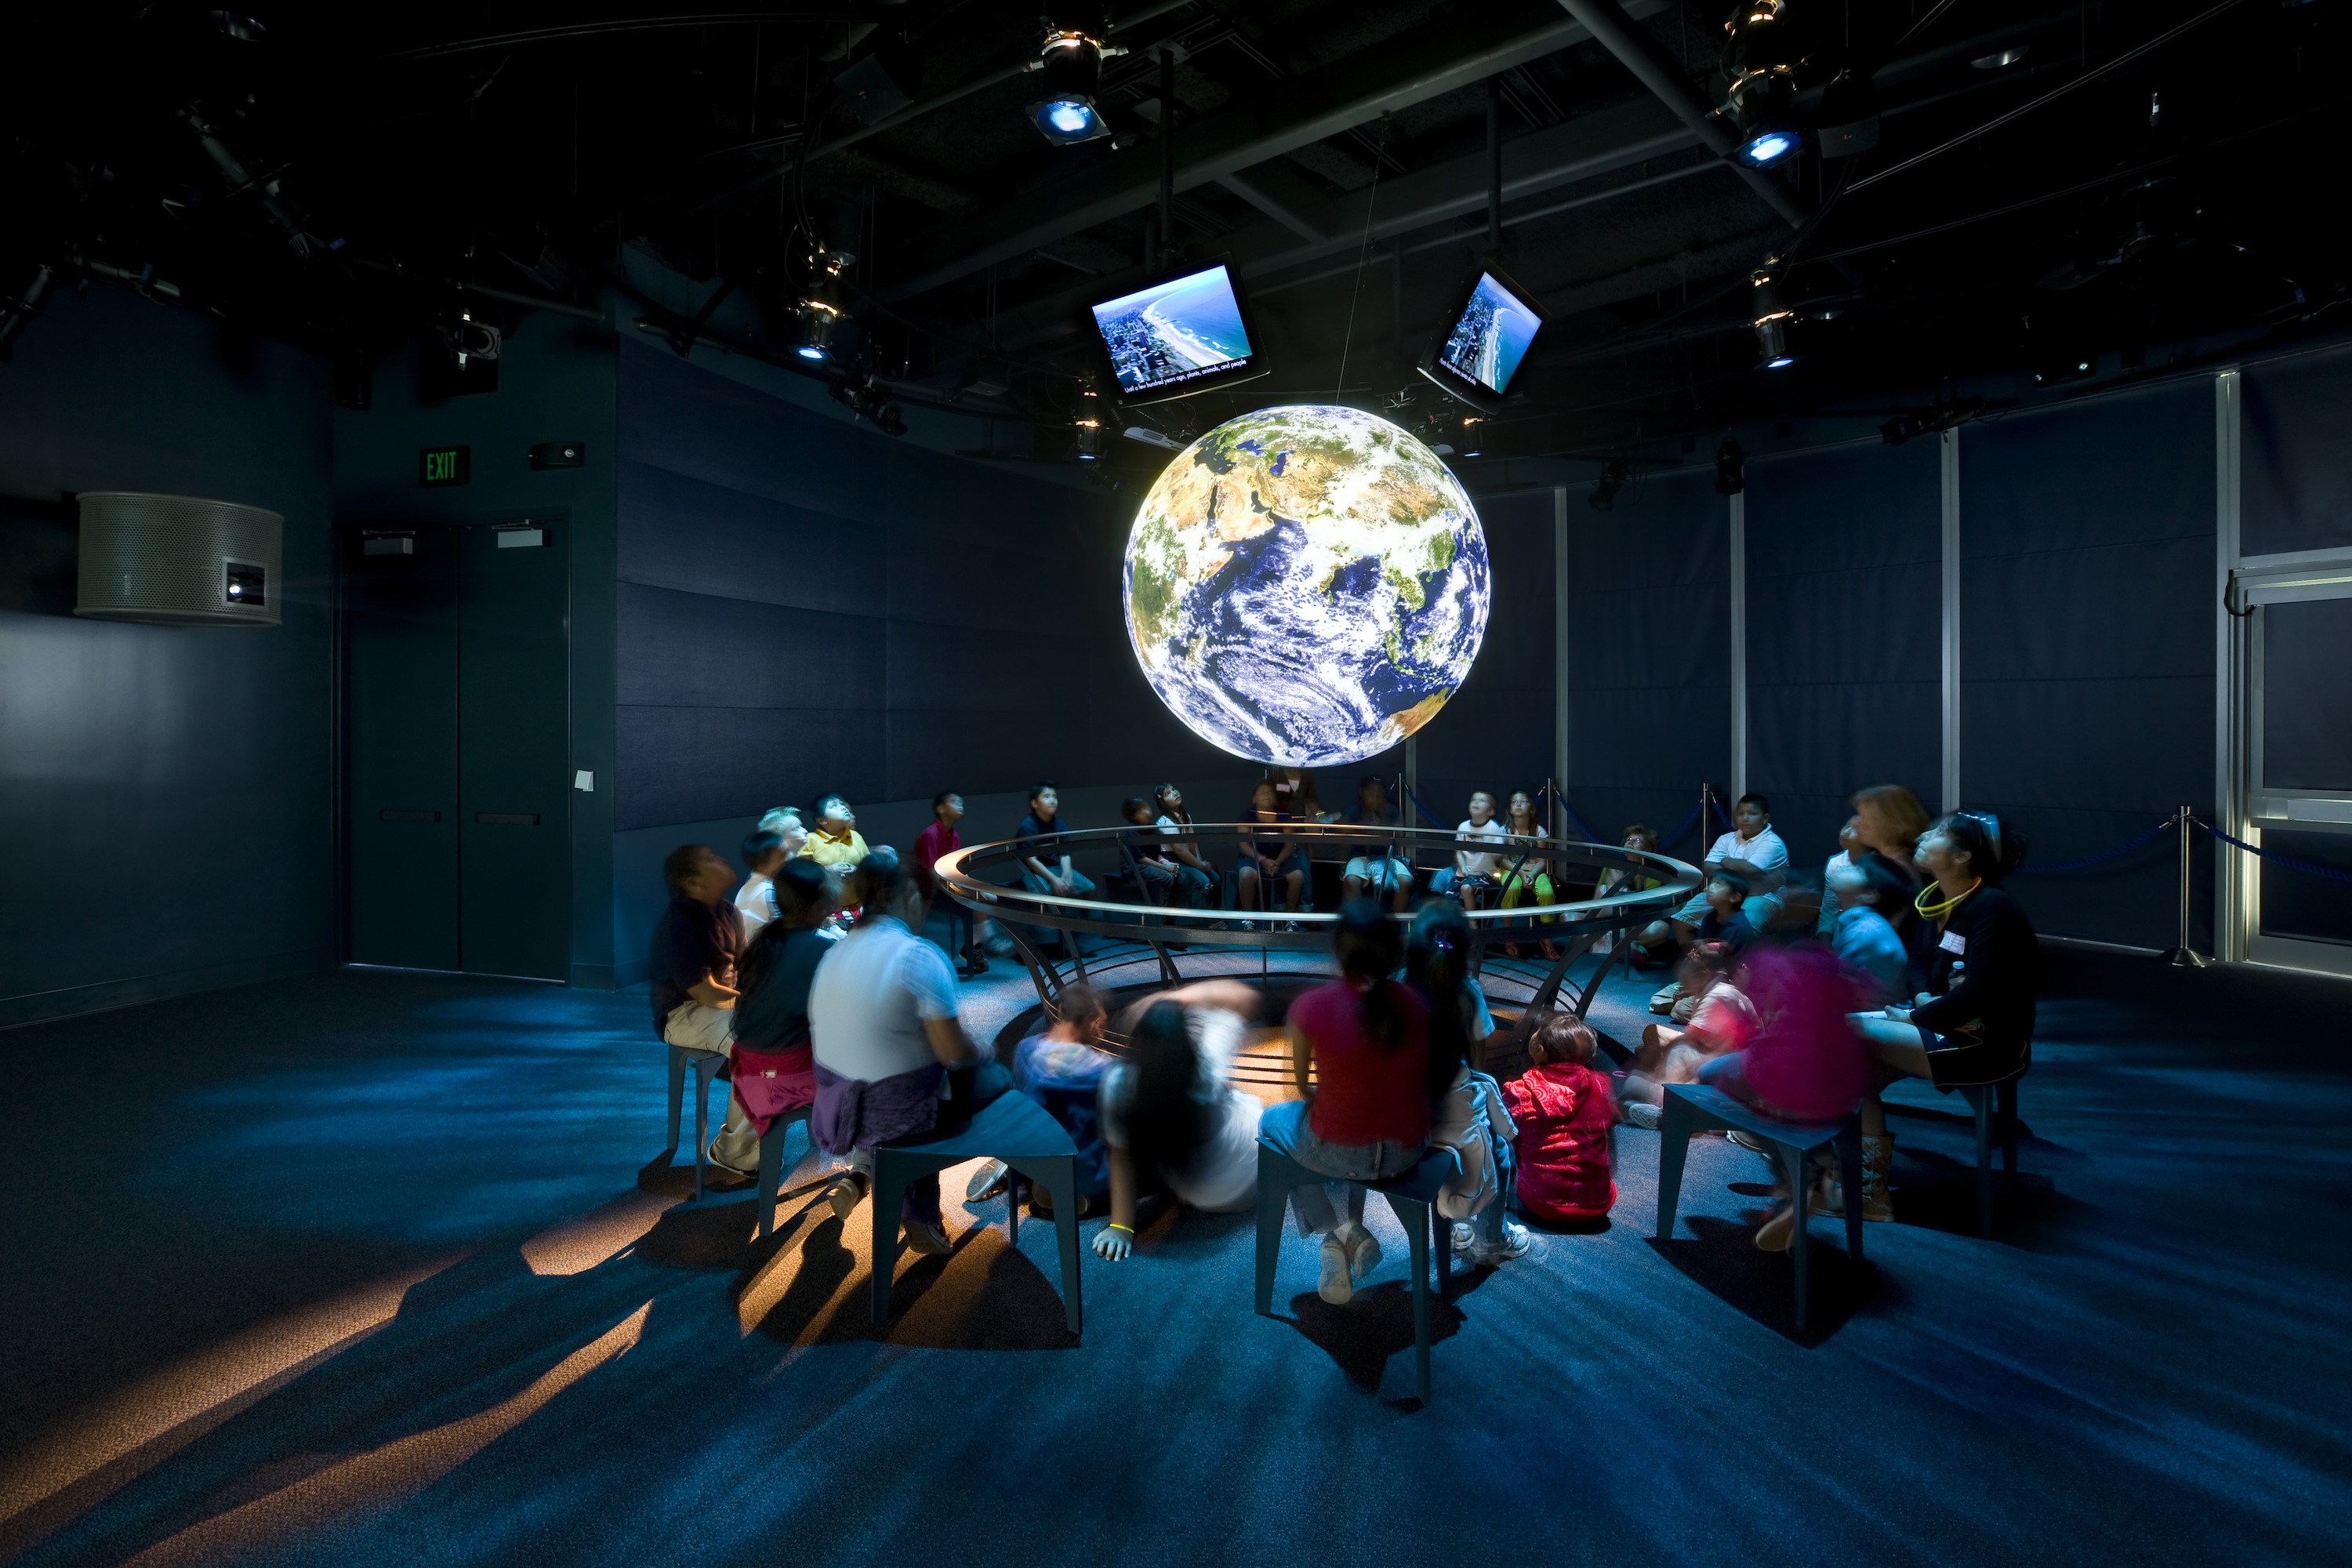 A group of people sit on stools or on the floor surrounding Science On a Sphere in a darkened theater. Four monitors are mounted above the Sphere facing outward to display additional information for the audience